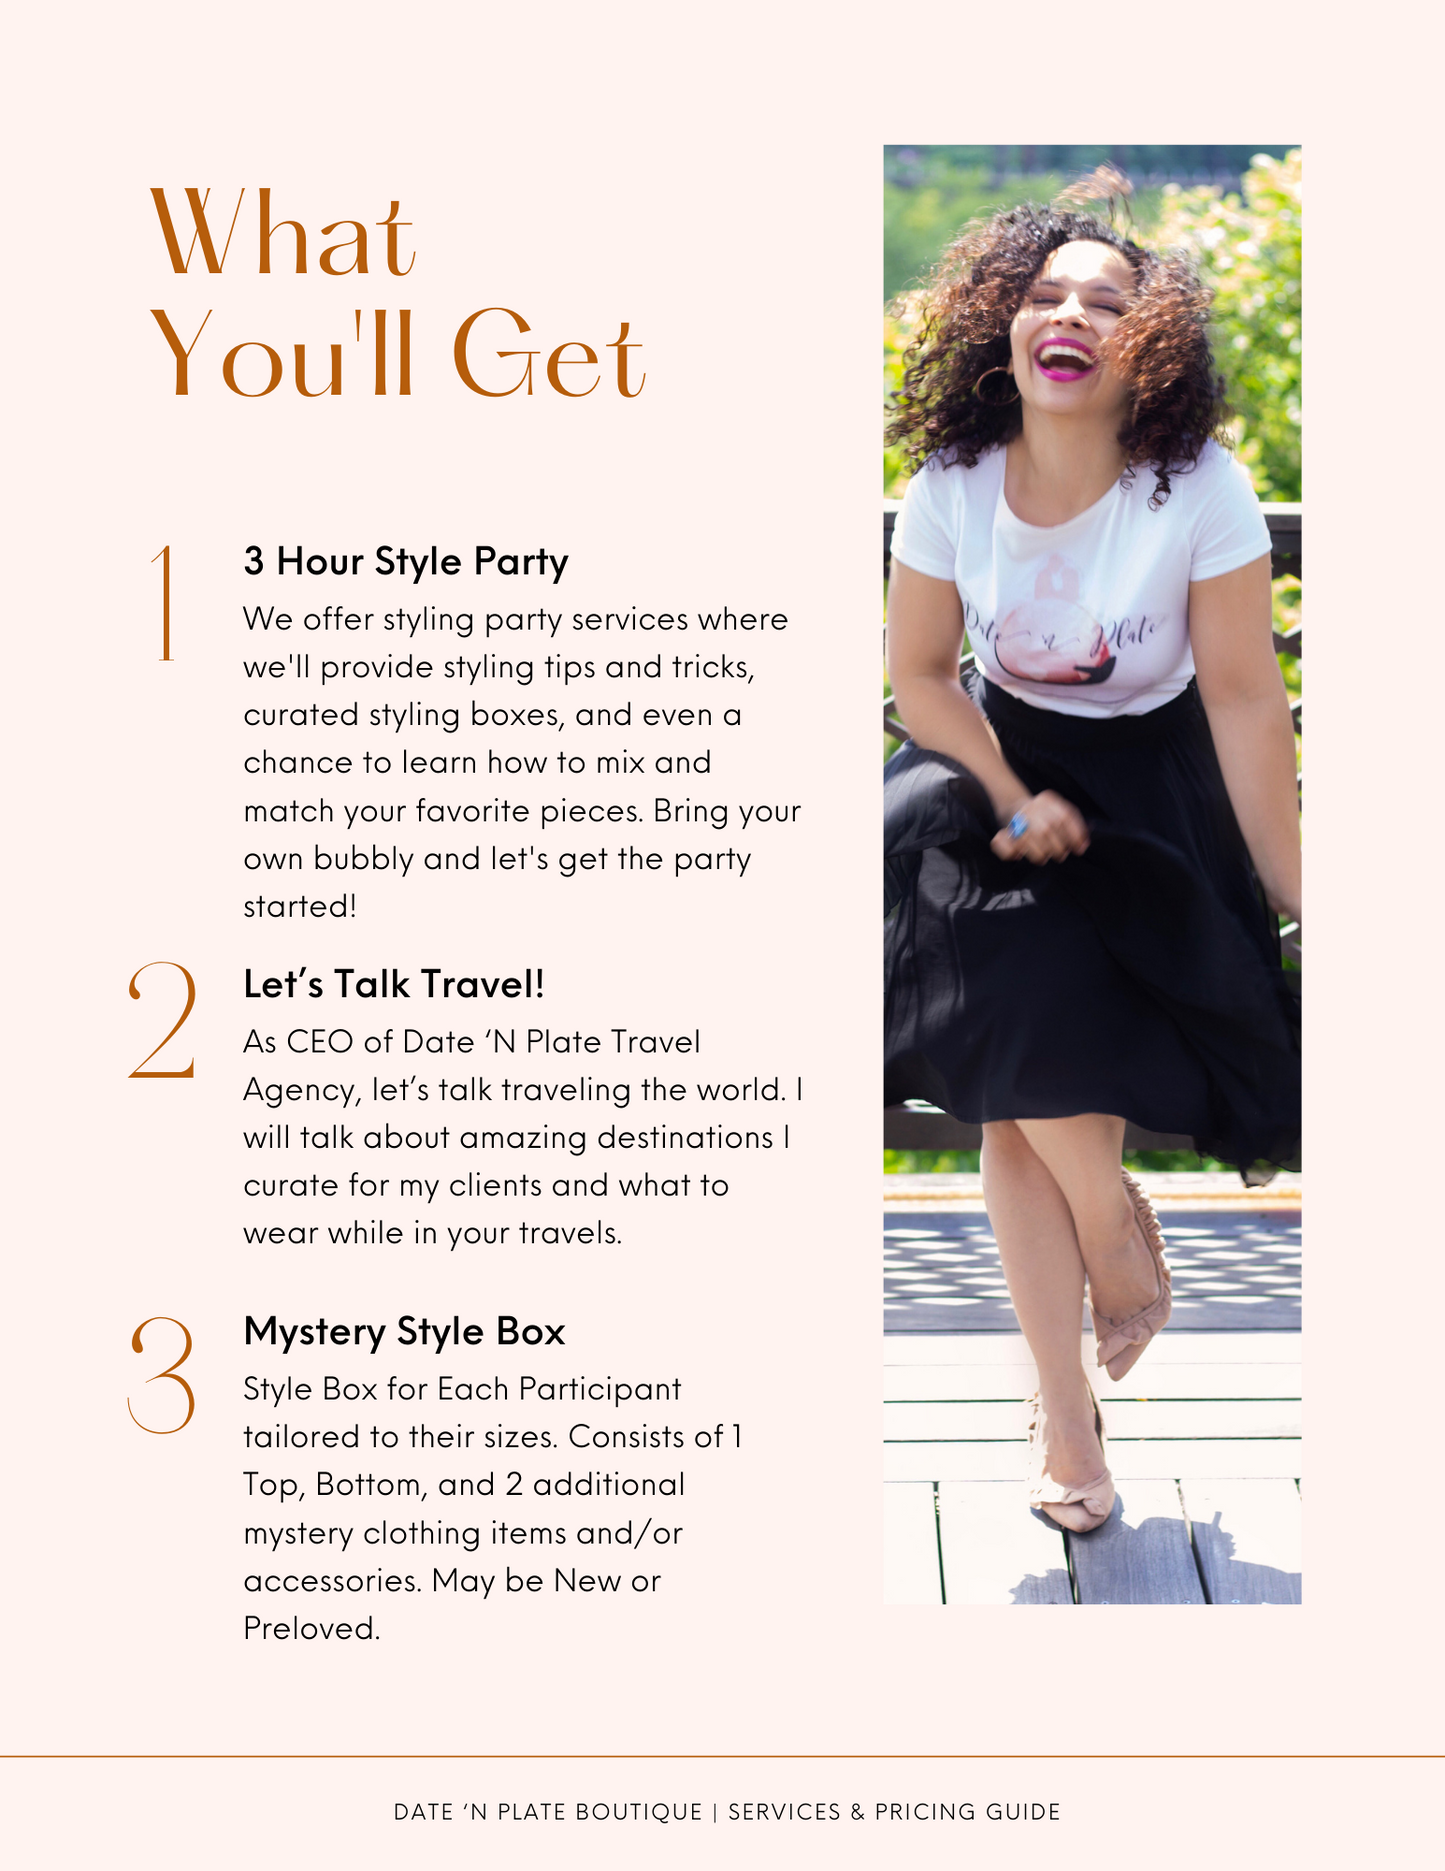 The Ultimate Styling Party Package: Styling Party and 1 on 1 Styling!